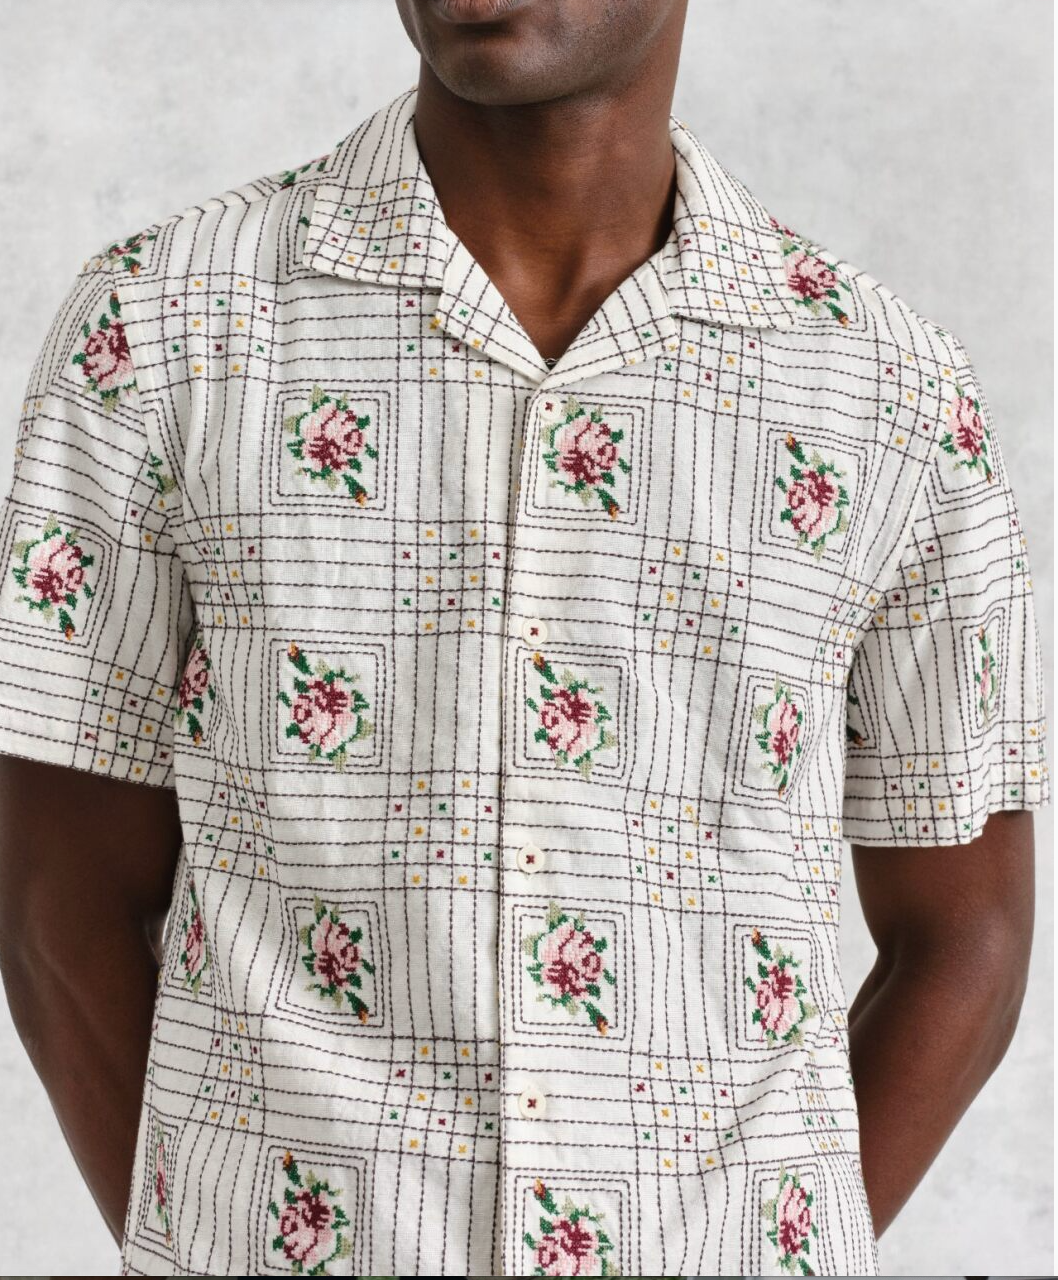 Didcot Shirt- Tapestry embroidery